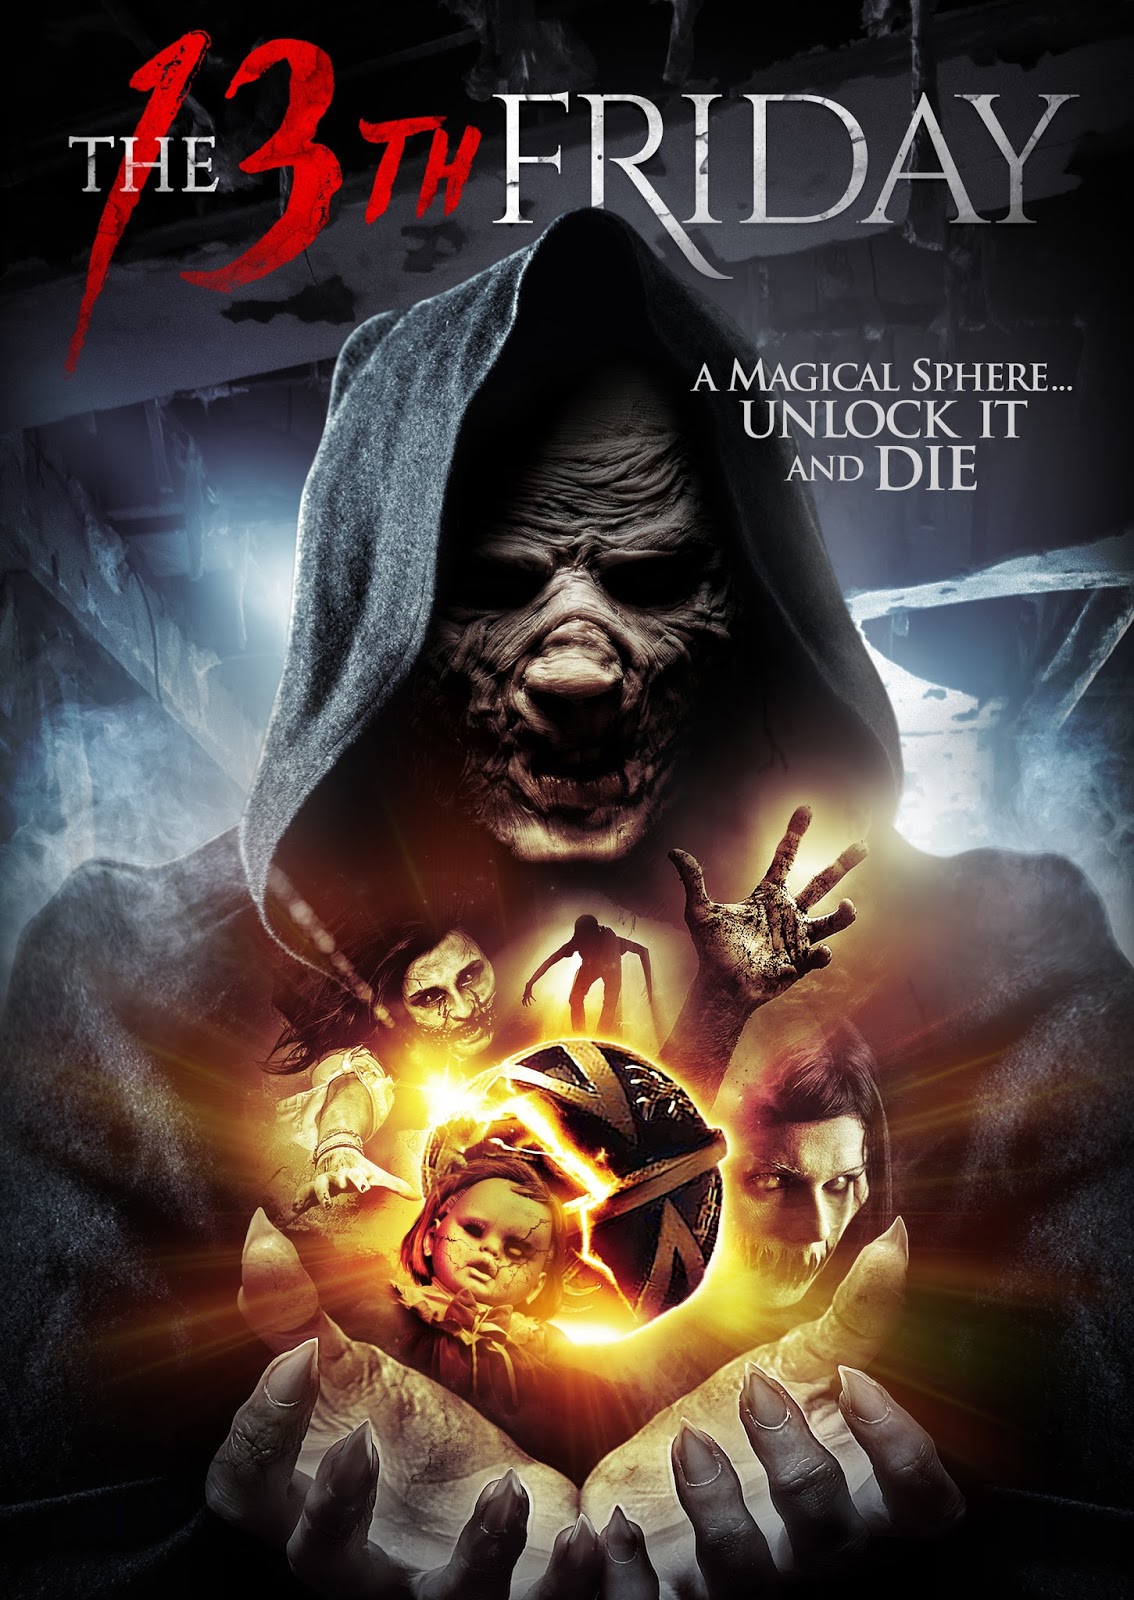 Been To The Movies The 13th Friday New Poster and Trailer